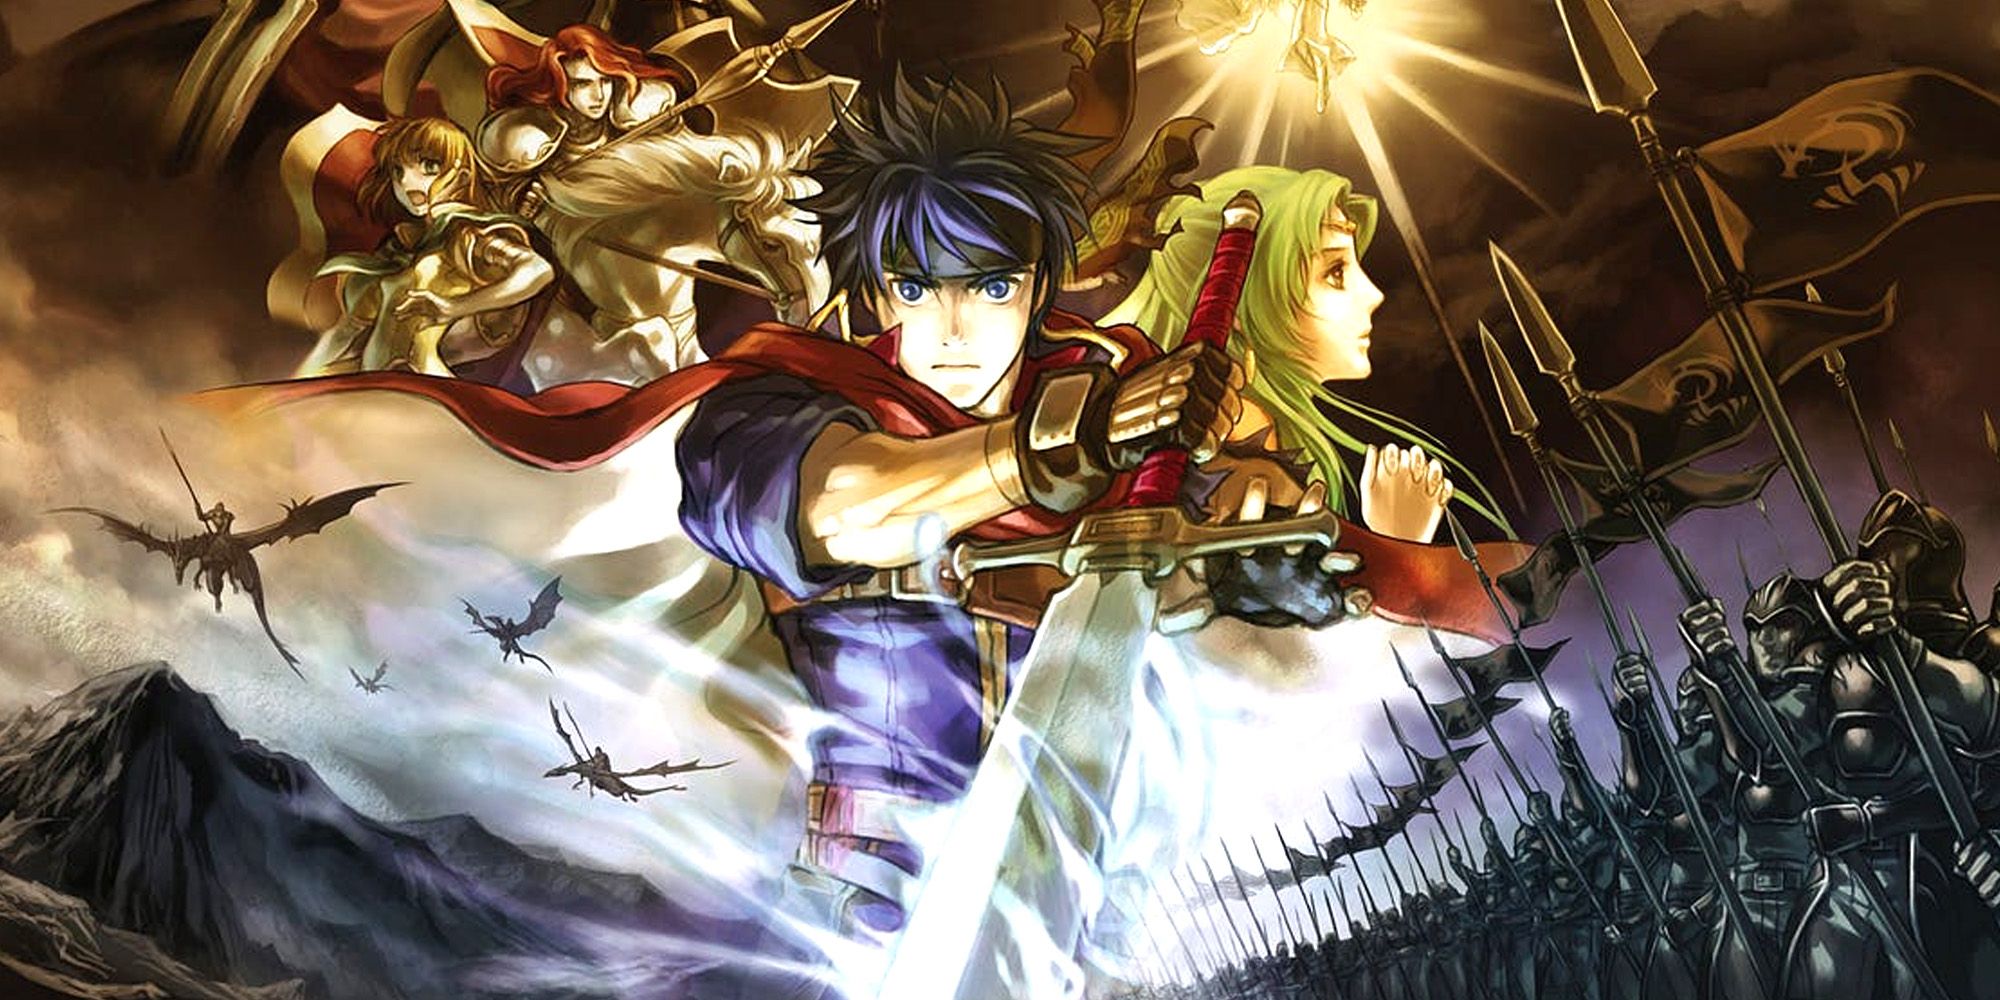 Fire Emblem Path of Radiance Art showing Marth in front of other characters, flying dragons, and an army.